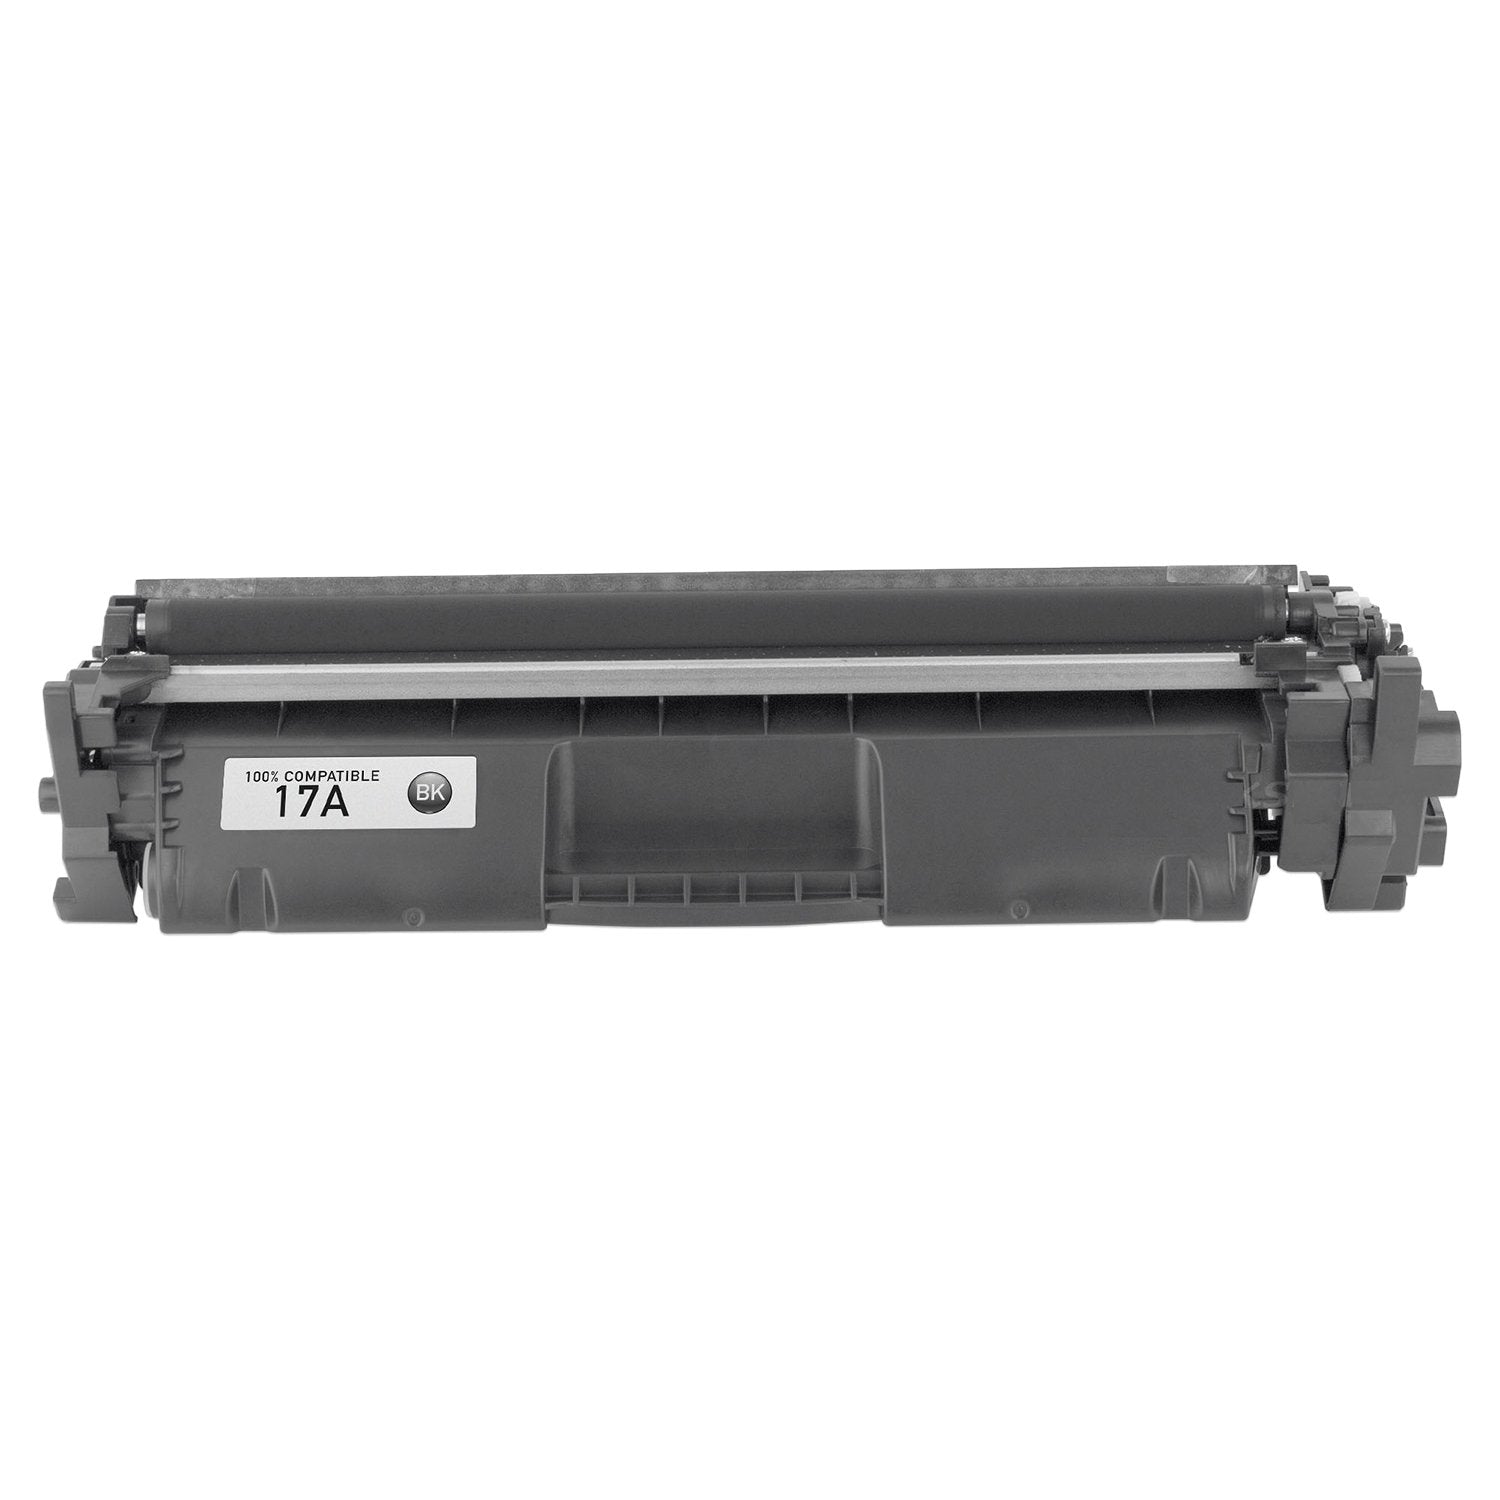 Absolute Toner Compatible 17A HP CF217A Black Toner Cartridge (with chip) For Use in HP Laserjet Pro M102w, Laserjet Pro MFP M130fn, M130fw, M130nw, M130a HP Toner Cartridges